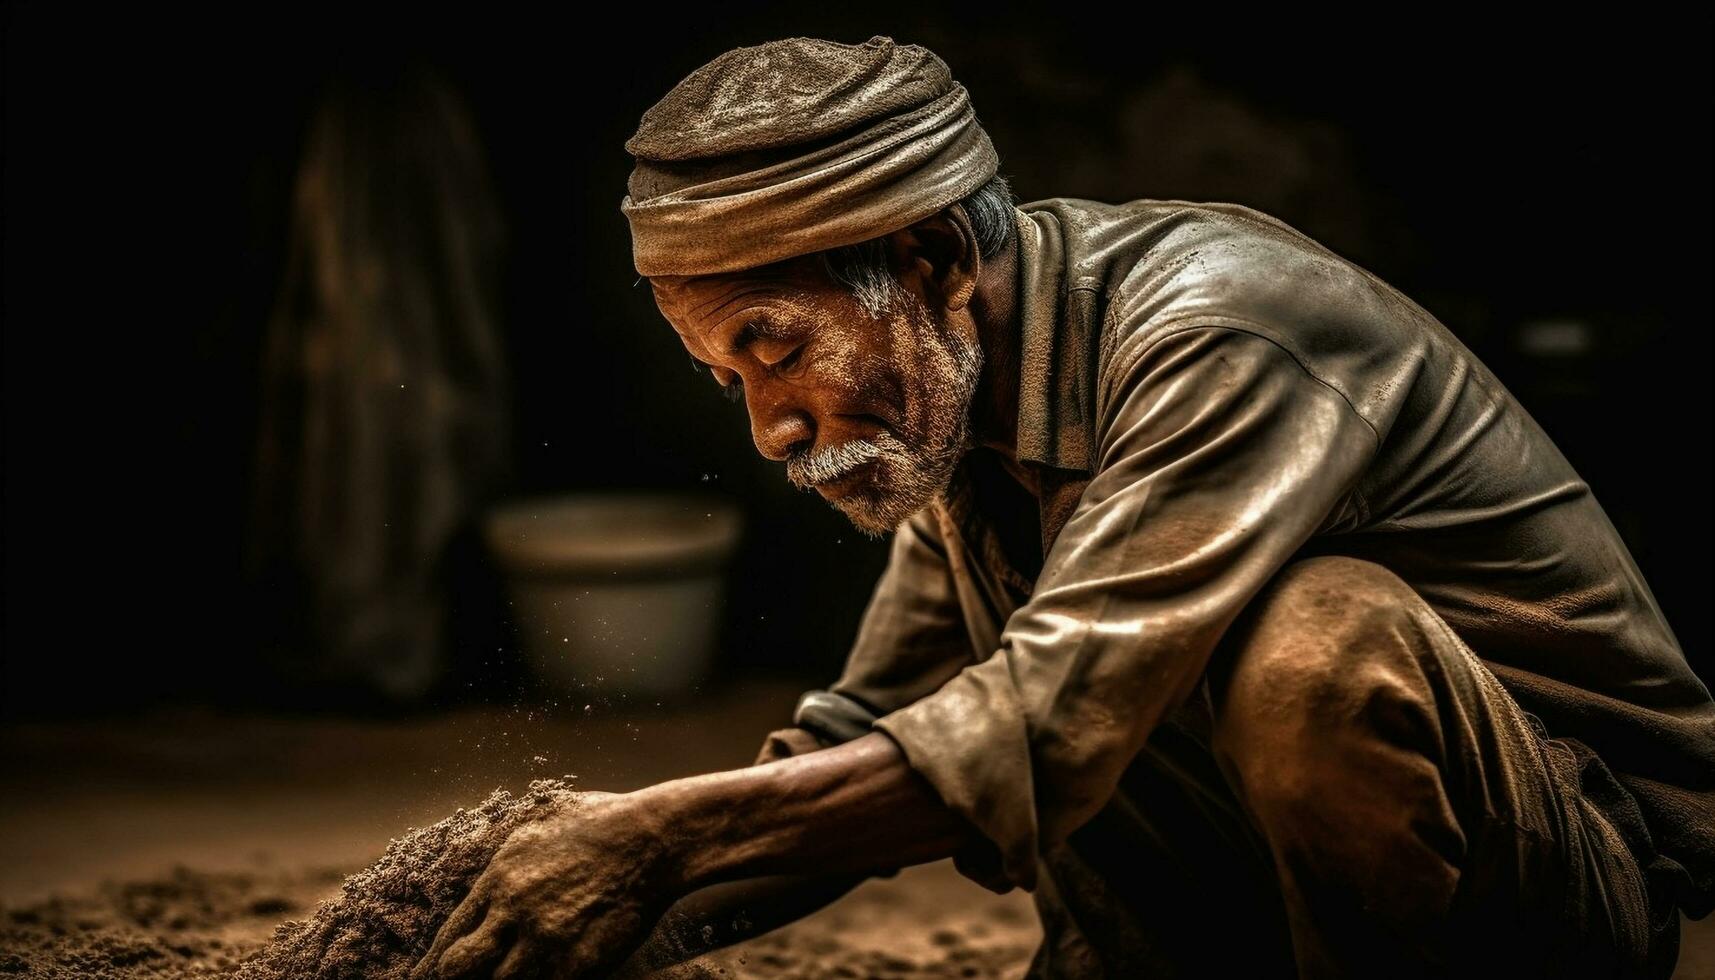 A senior man with a beard working outdoors, sitting on a turban generated by AI photo